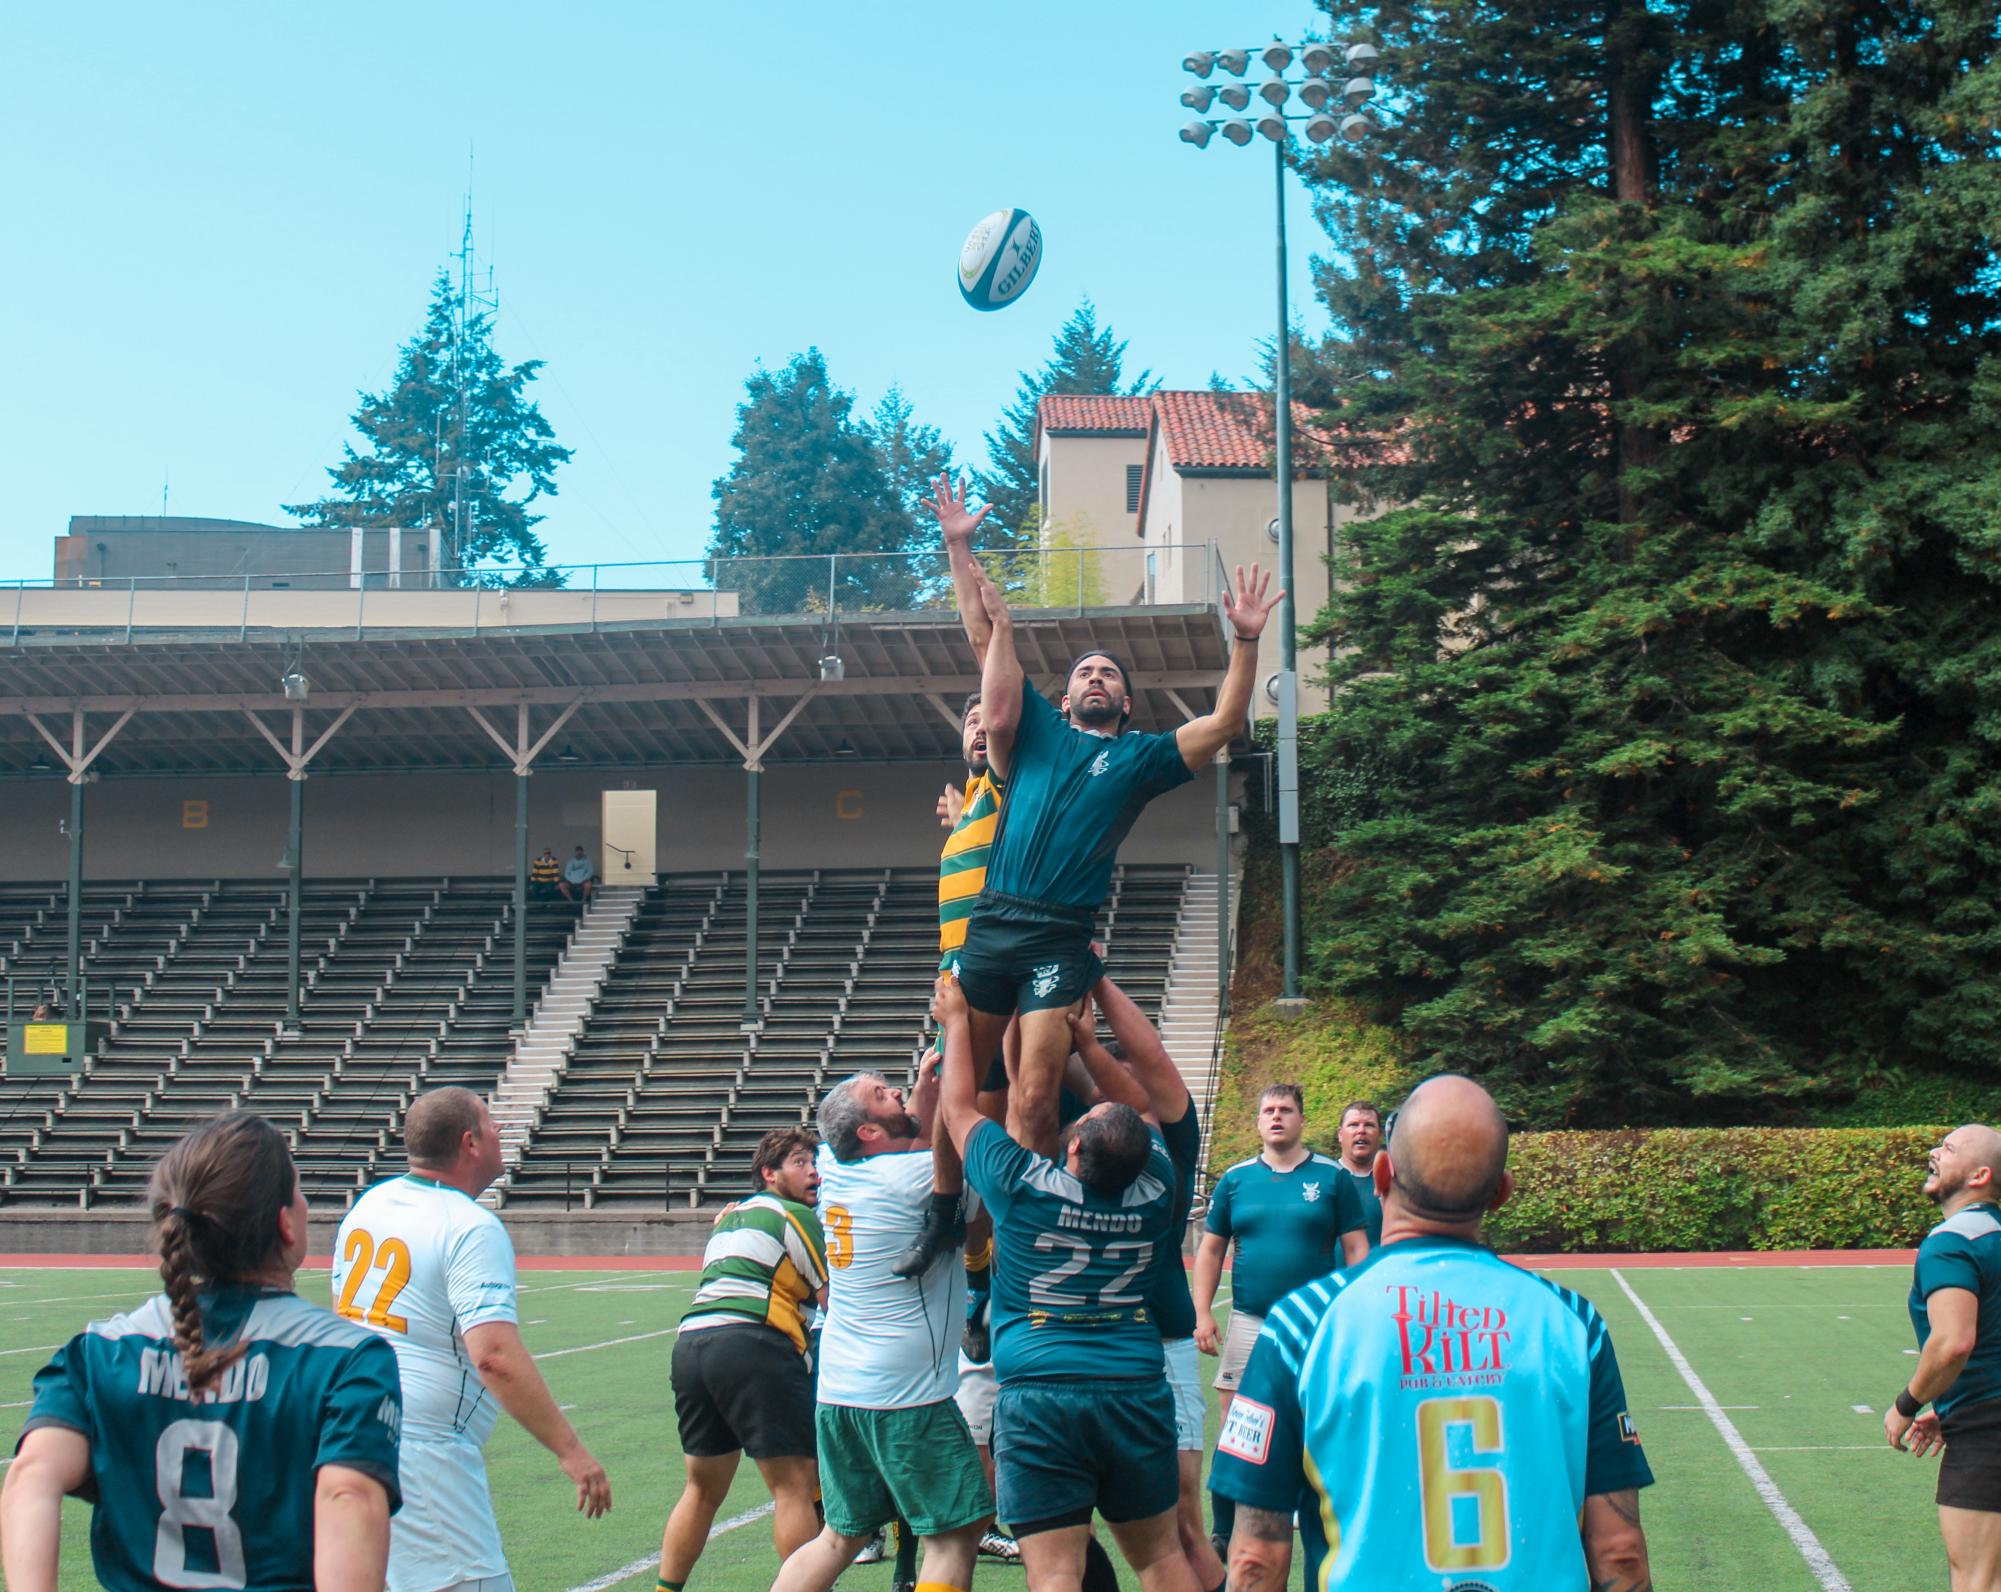 Men's Rugby Wins 2022 National Championship - Cal Poly Humboldt Athletics